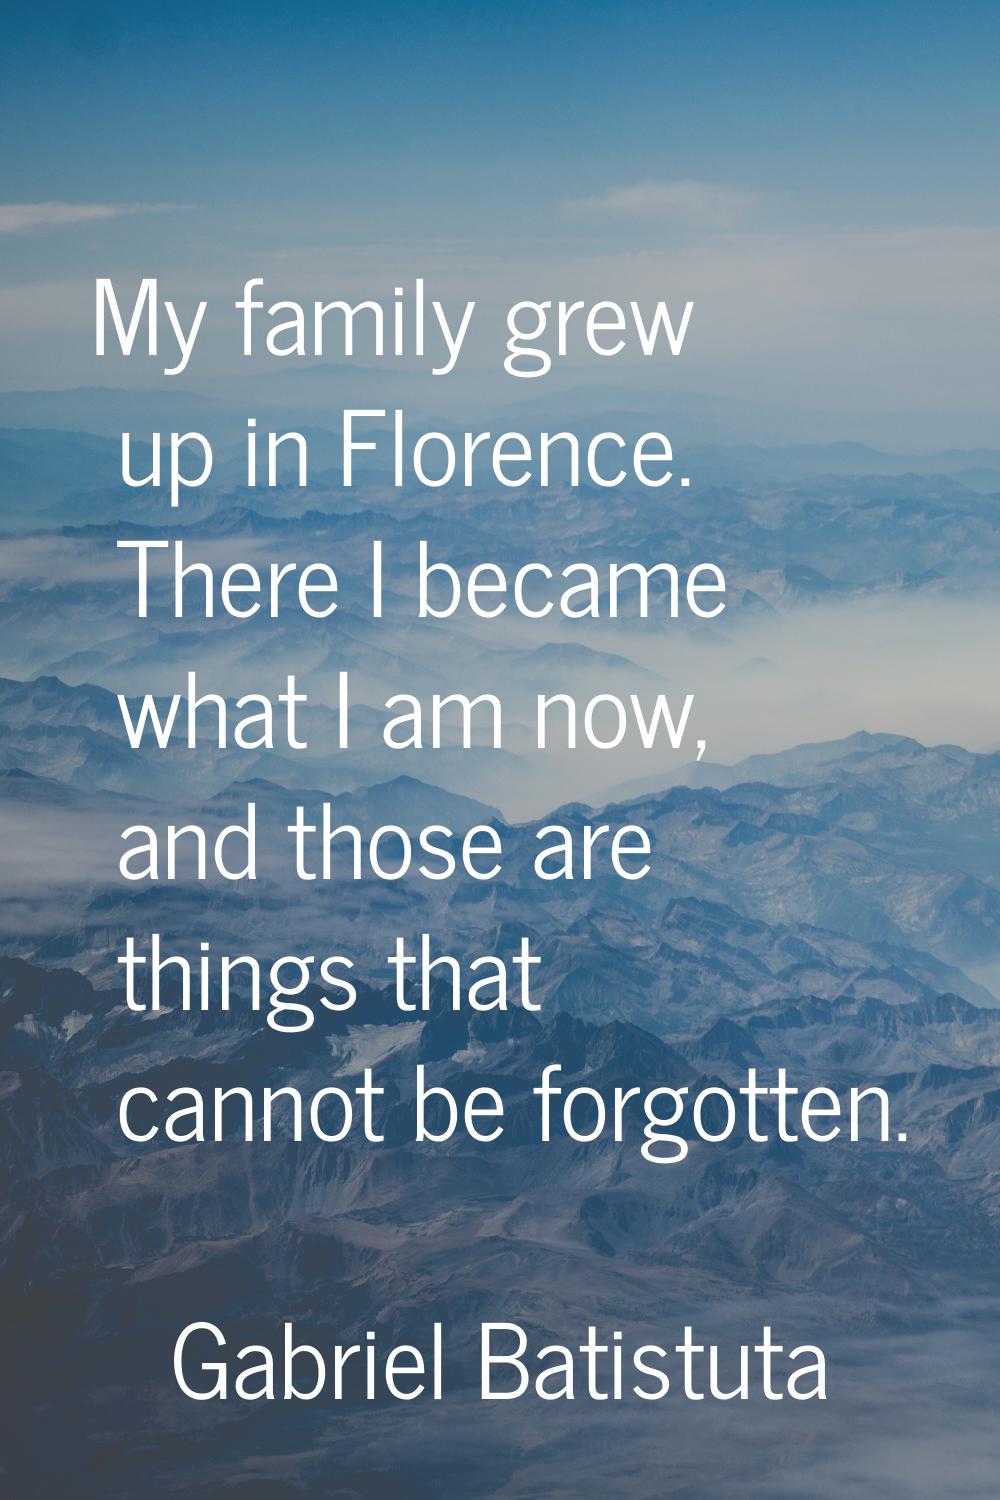 My family grew up in Florence. There I became what I am now, and those are things that cannot be fo